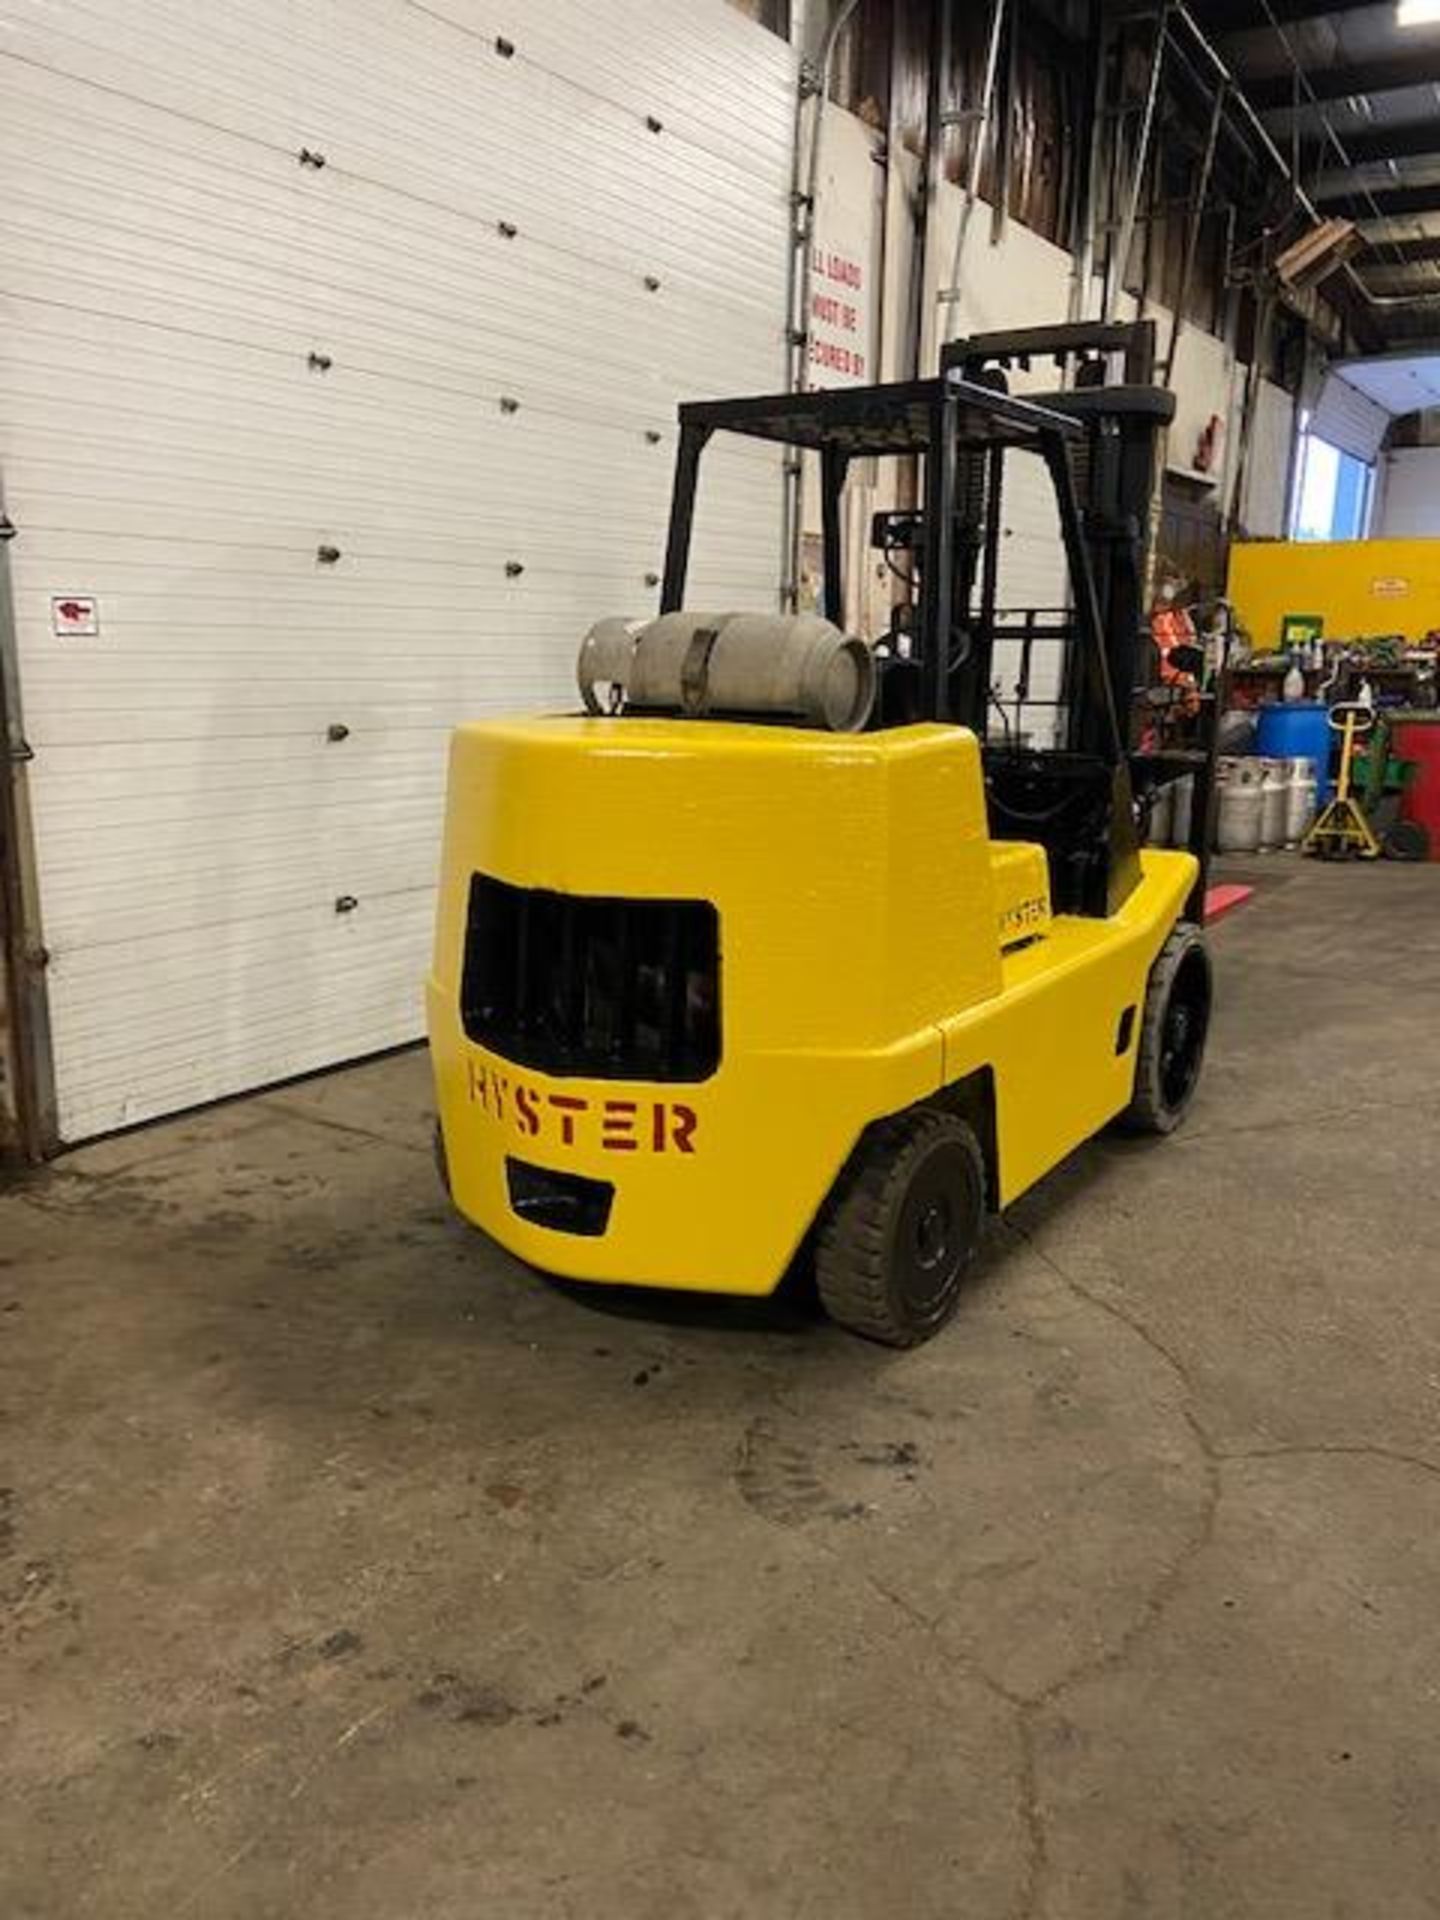 FREE CUSTOMS - Hyster 15500lbs capacity LPG (propane) Forklift (no propane tank included) - Image 3 of 3